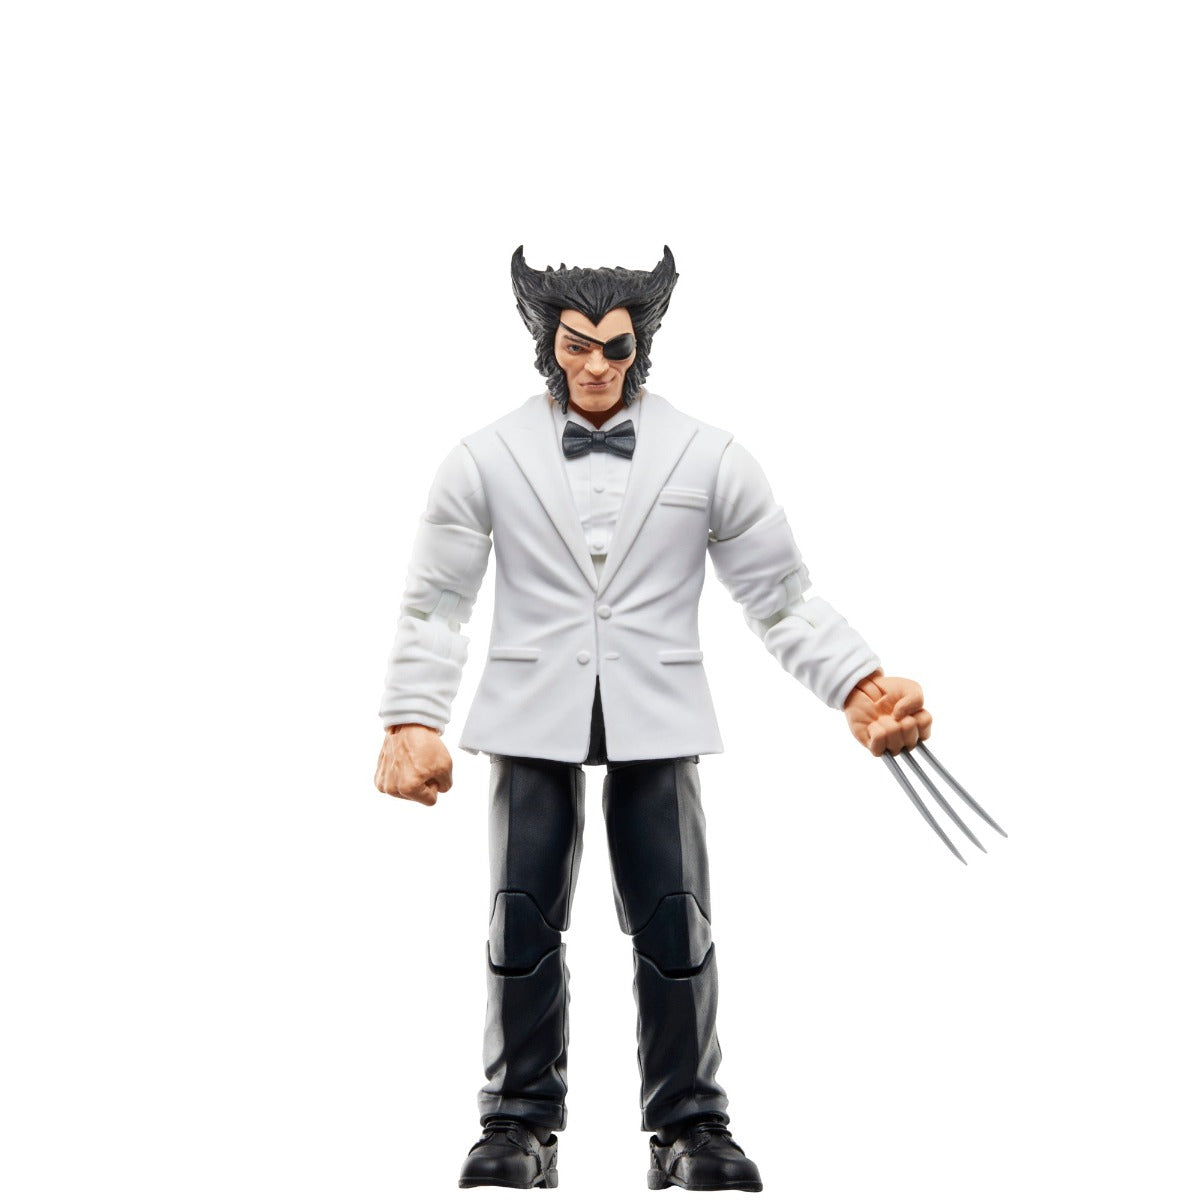 Marvel Legends Series Marvel's Patch and Joe Fixit, Wolverine 50th Anniversary Comics Collectible 6-Inch Scale Action Figure 2-Pack